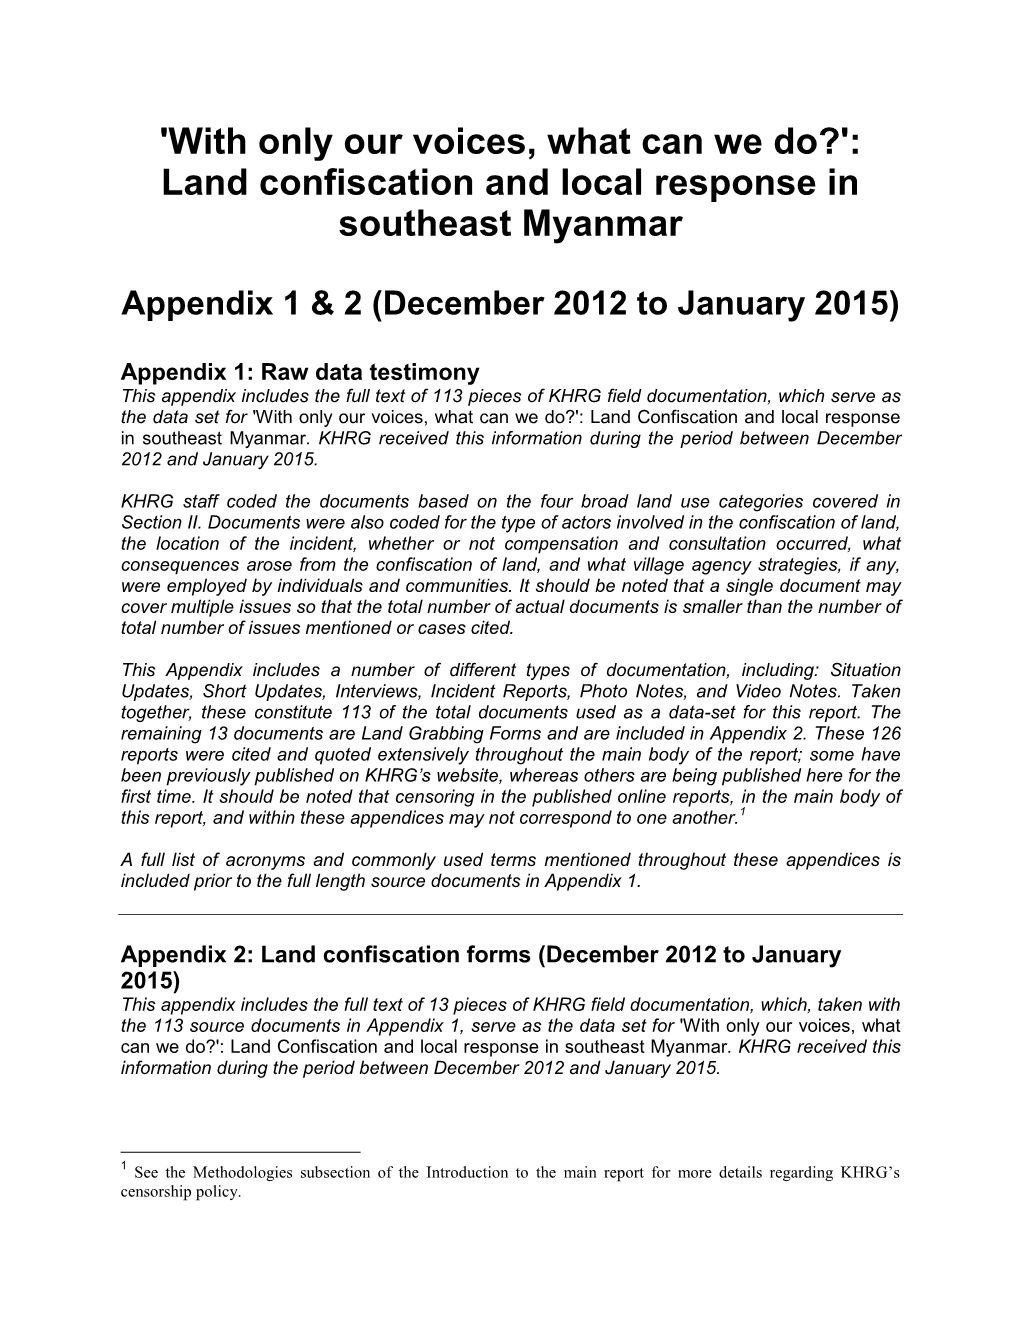 Land Confiscation and Local Response in Southeast Myanmar